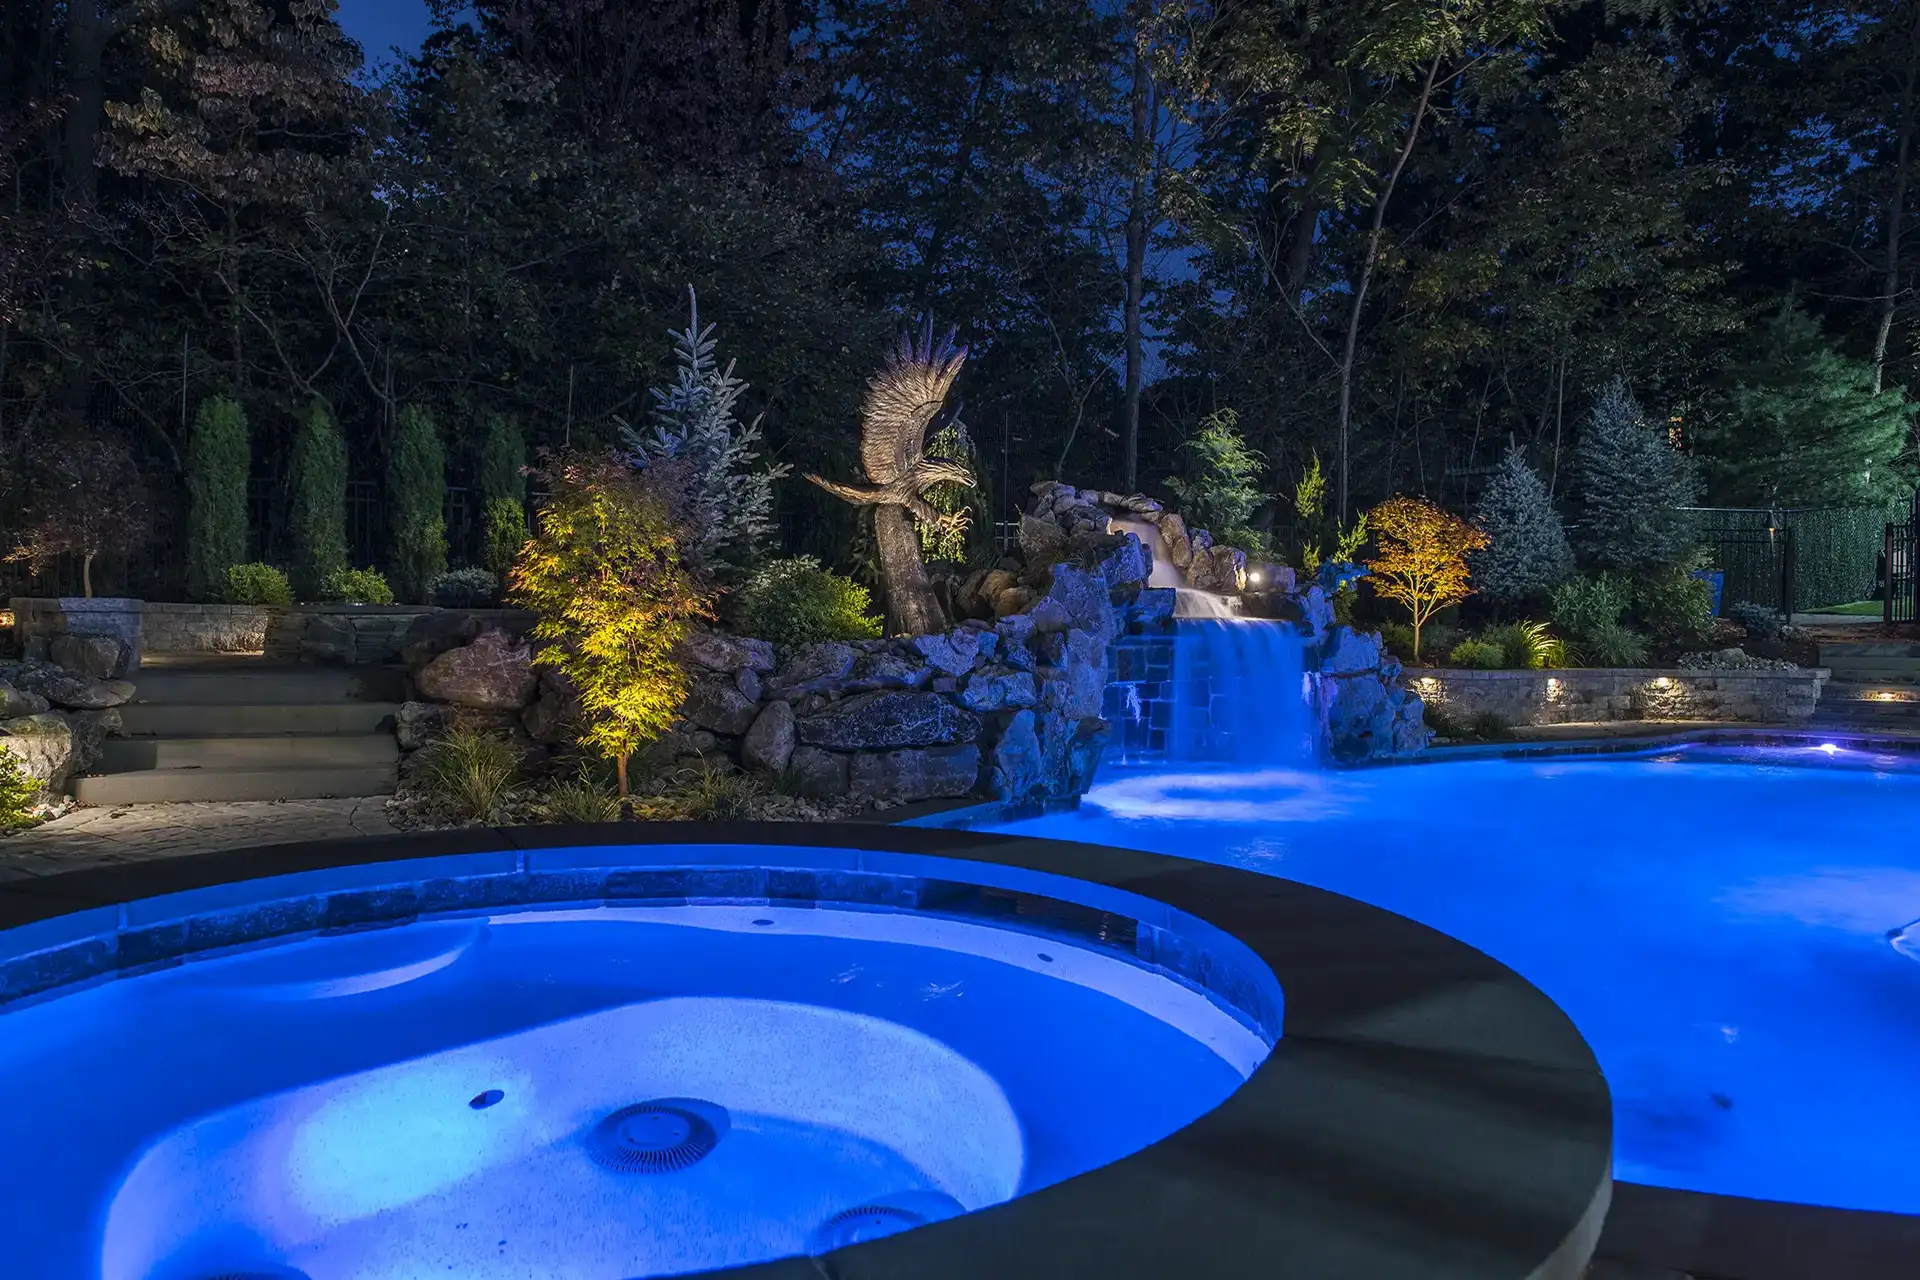 Corradino residence image 5 pool statuary Lighthouse Outdoor Lighting and Audio Northern New Jersey